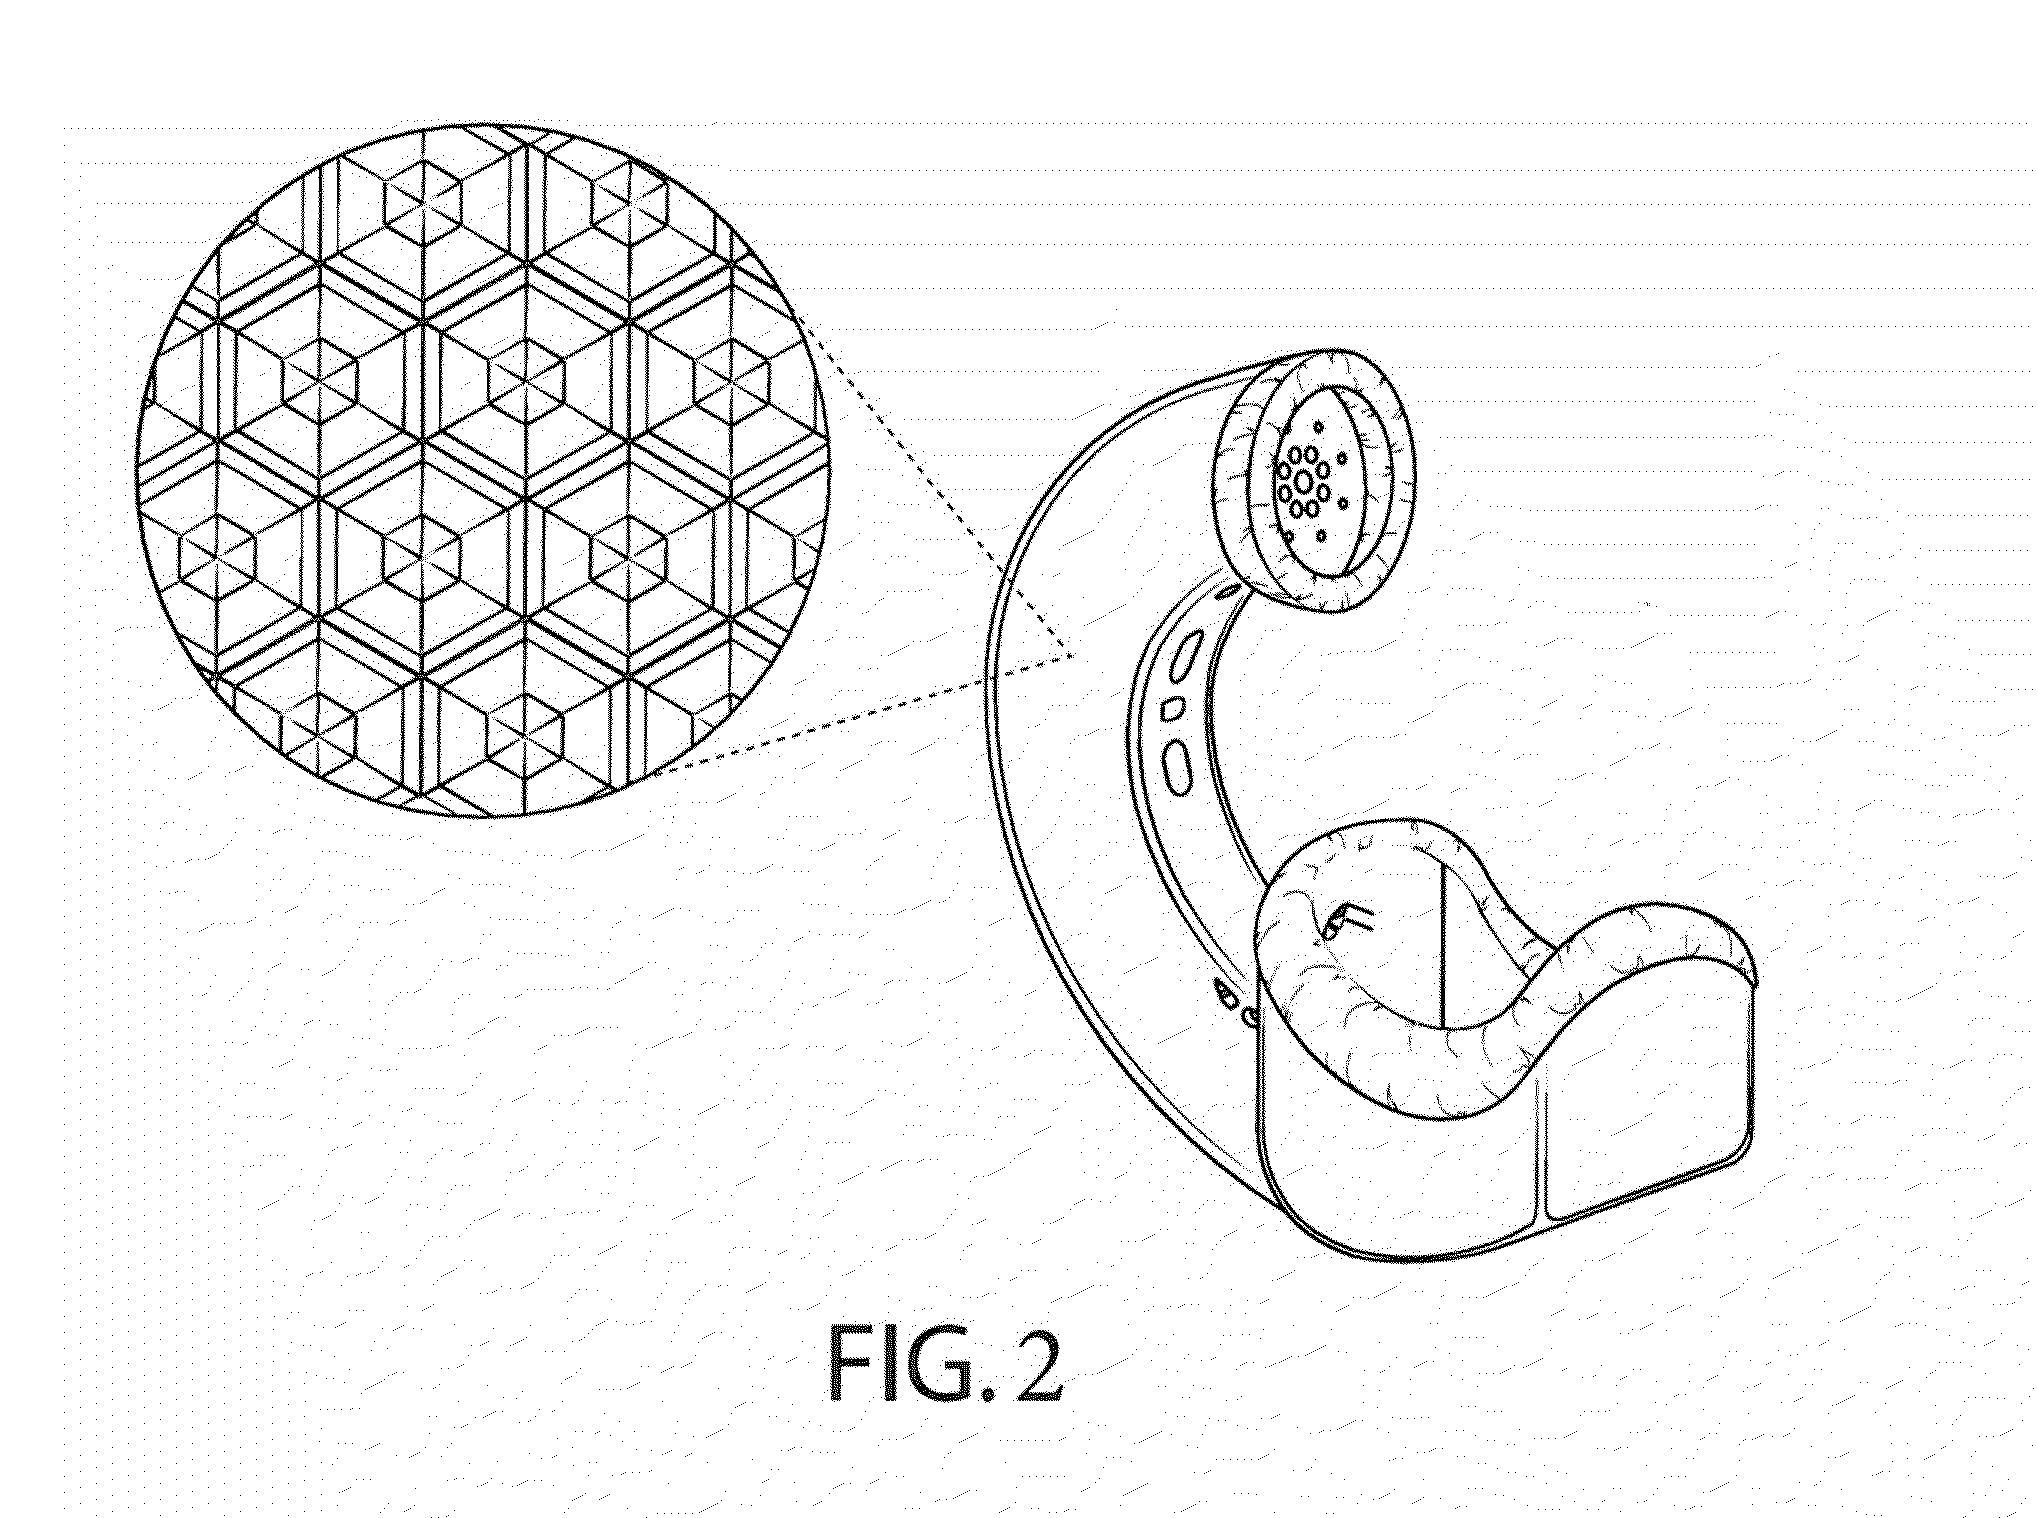 Ergonomic Tubular Anechoic Chambers for Use with a Communication Device and Related Methods